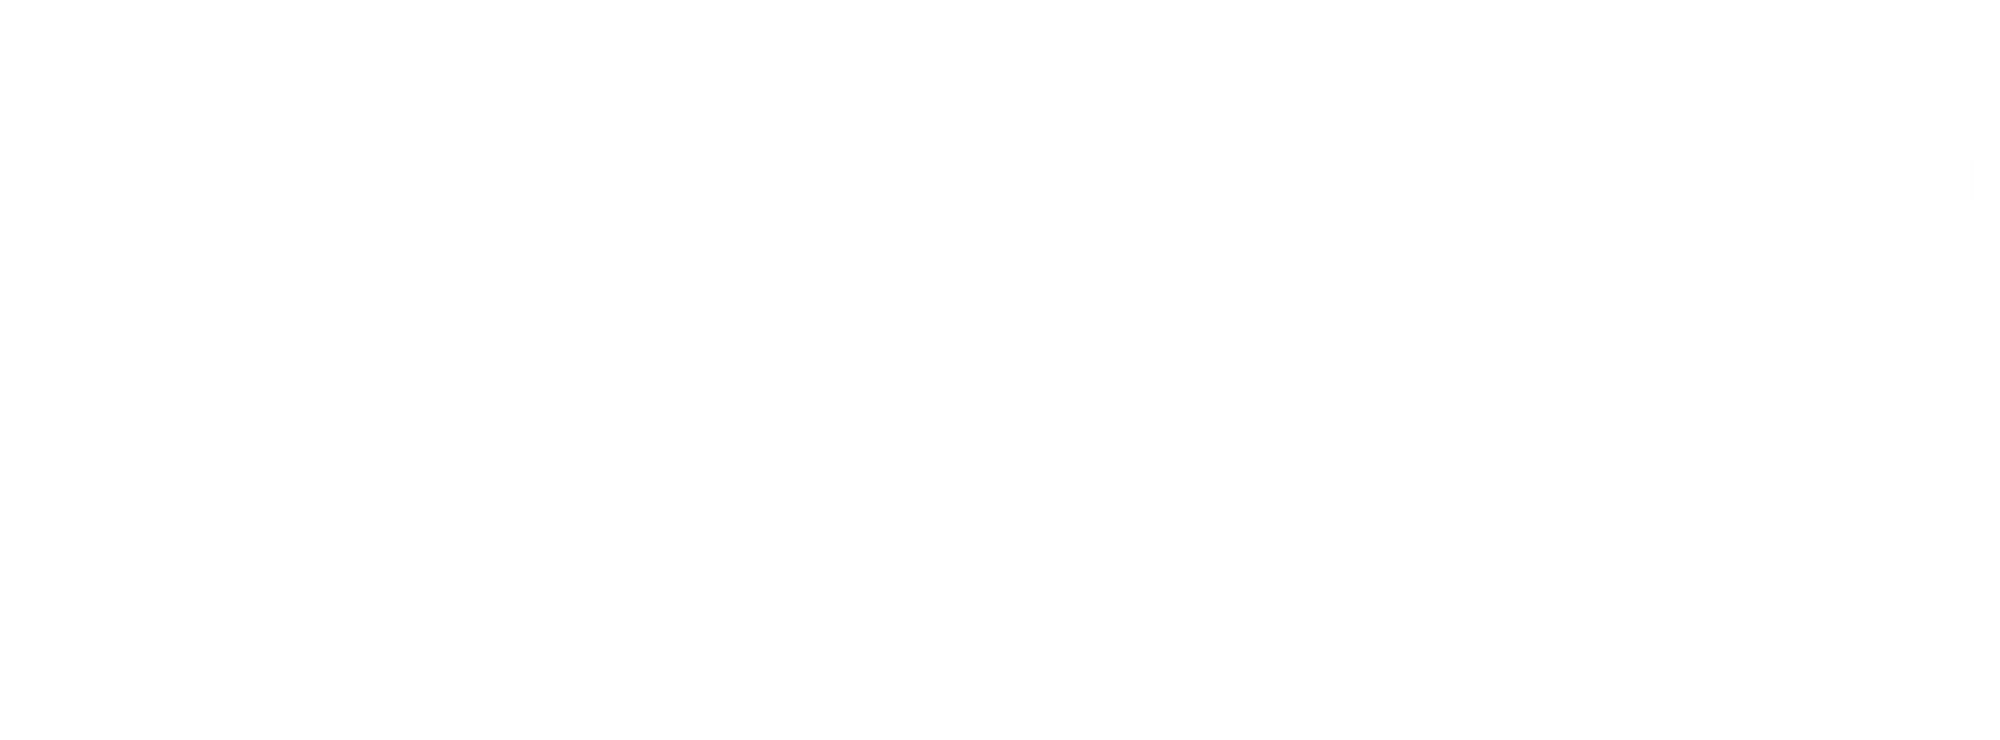 Rhyot | Official Website